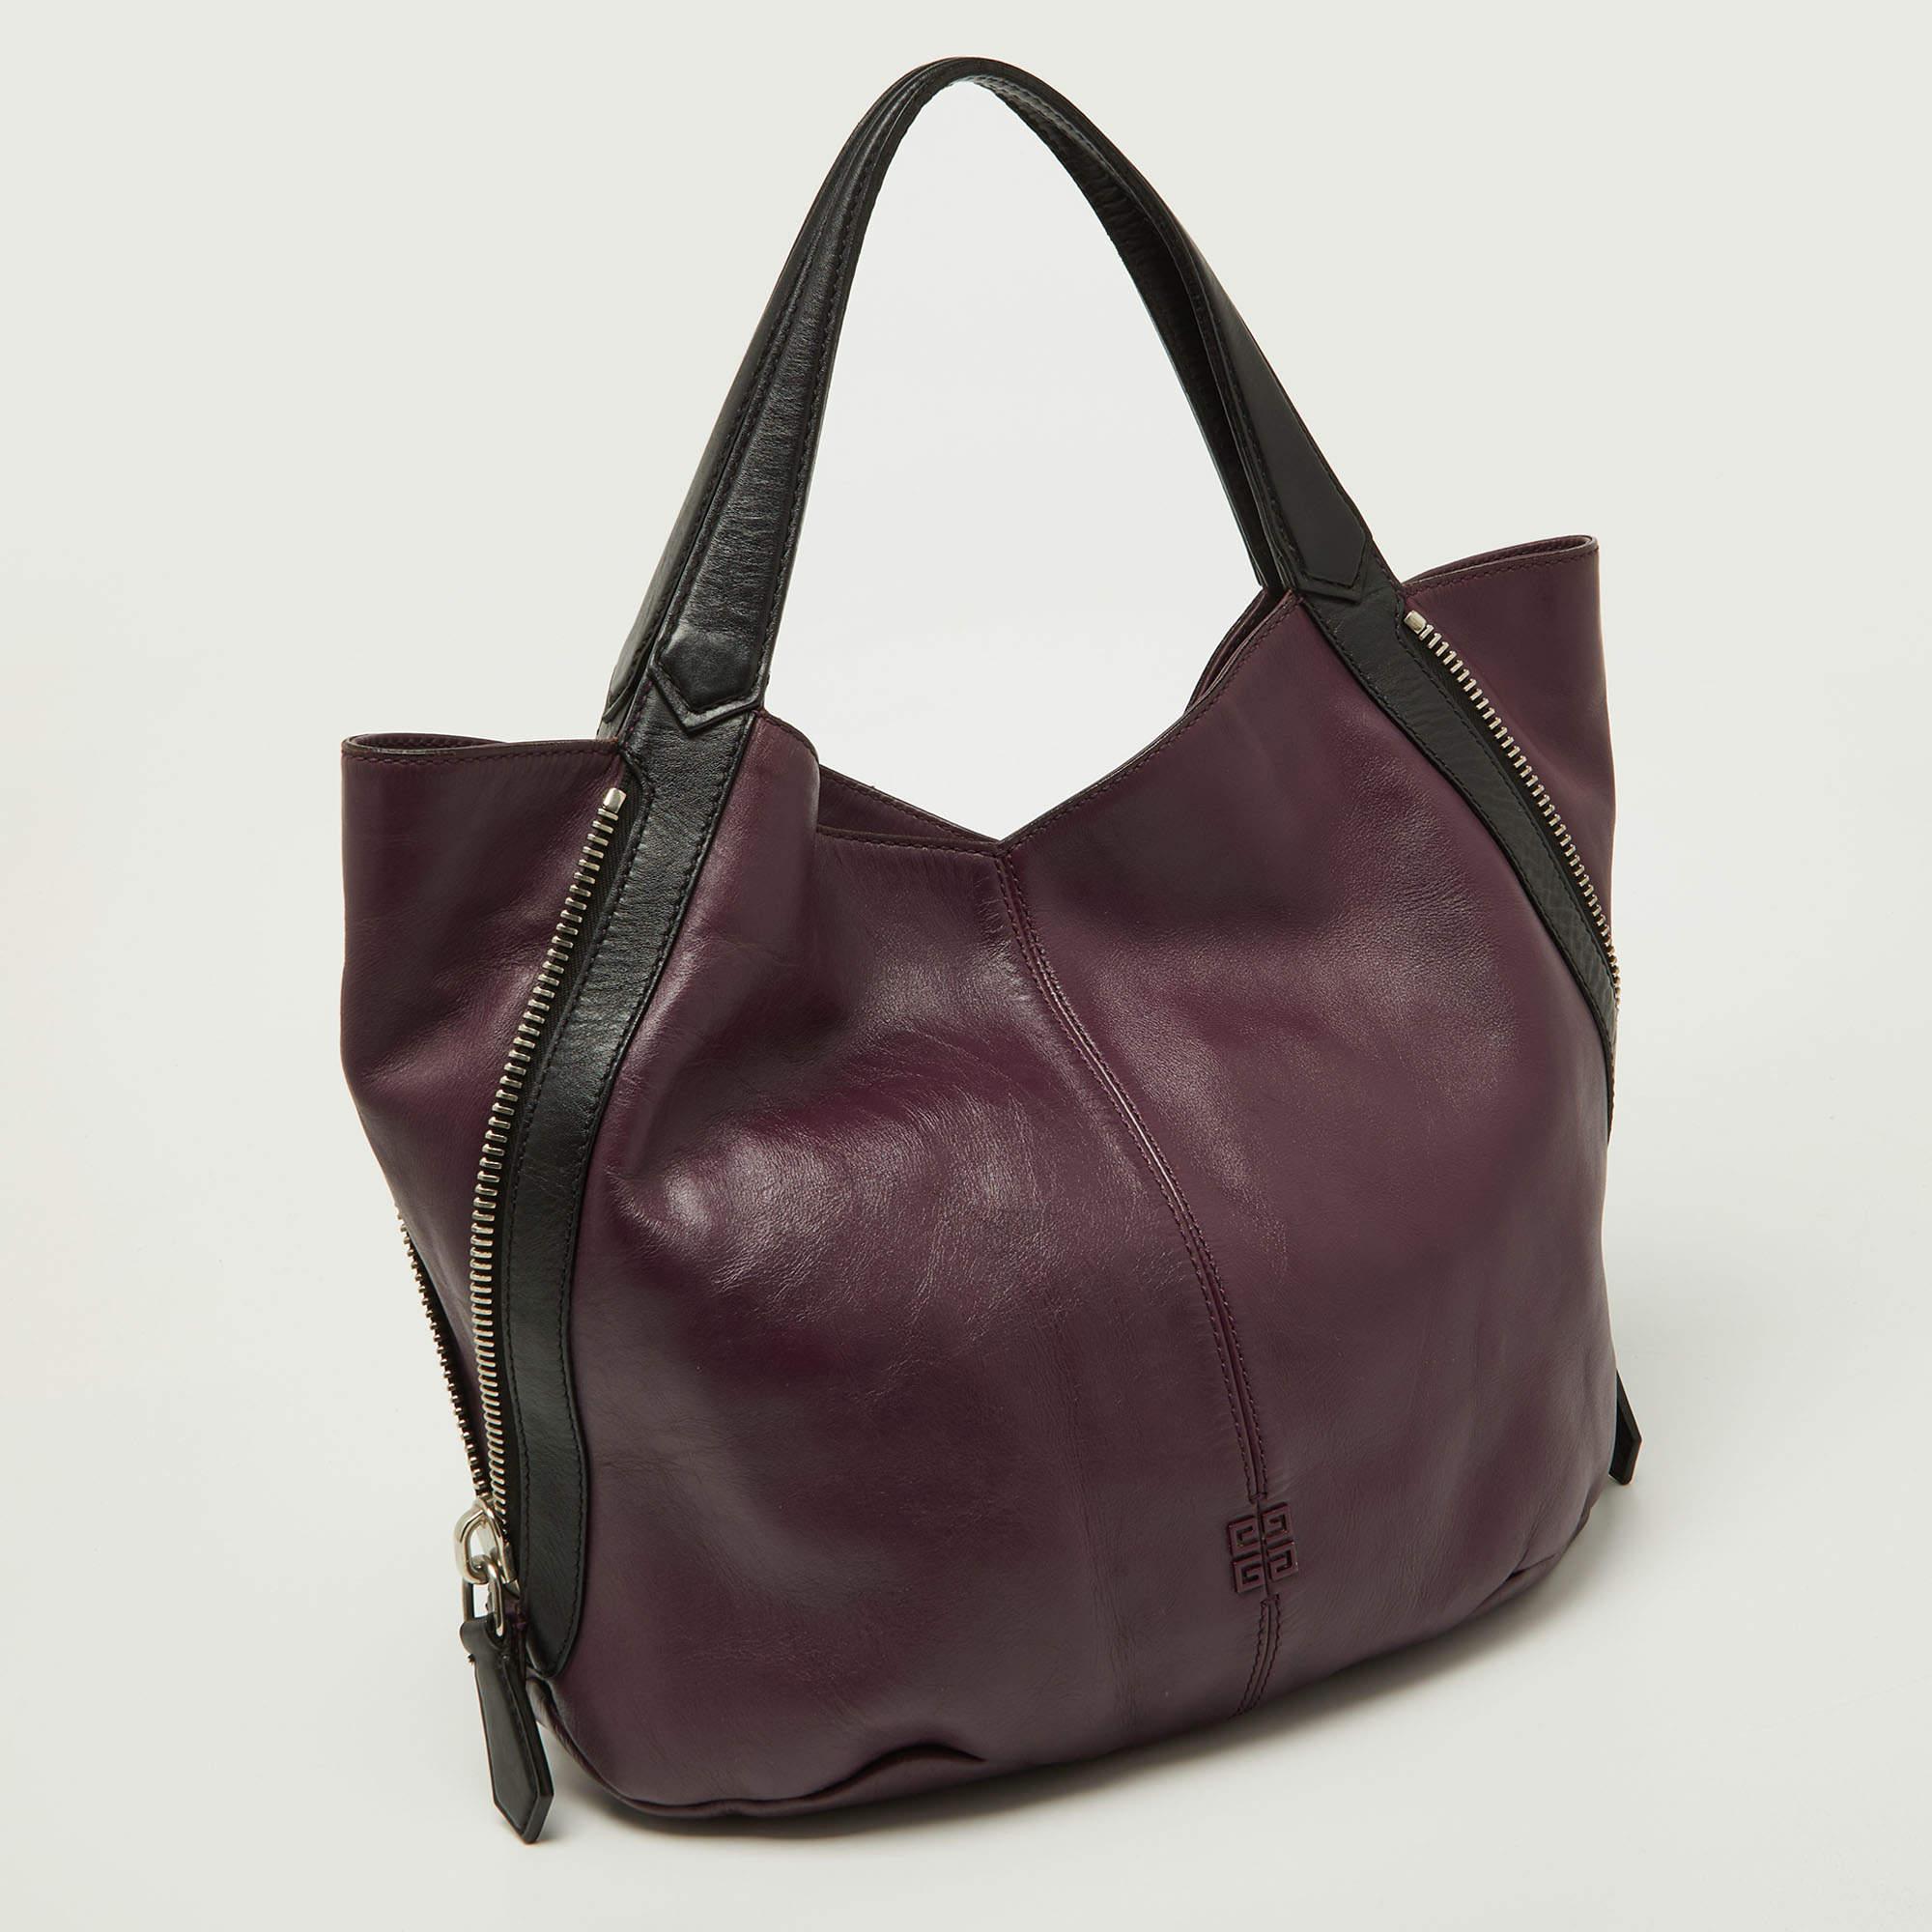 Stylish handbags never fail to make a fashionable impression. Make this designer hobo yours by pairing it with your sophisticated workwear as well as playful casual looks.

